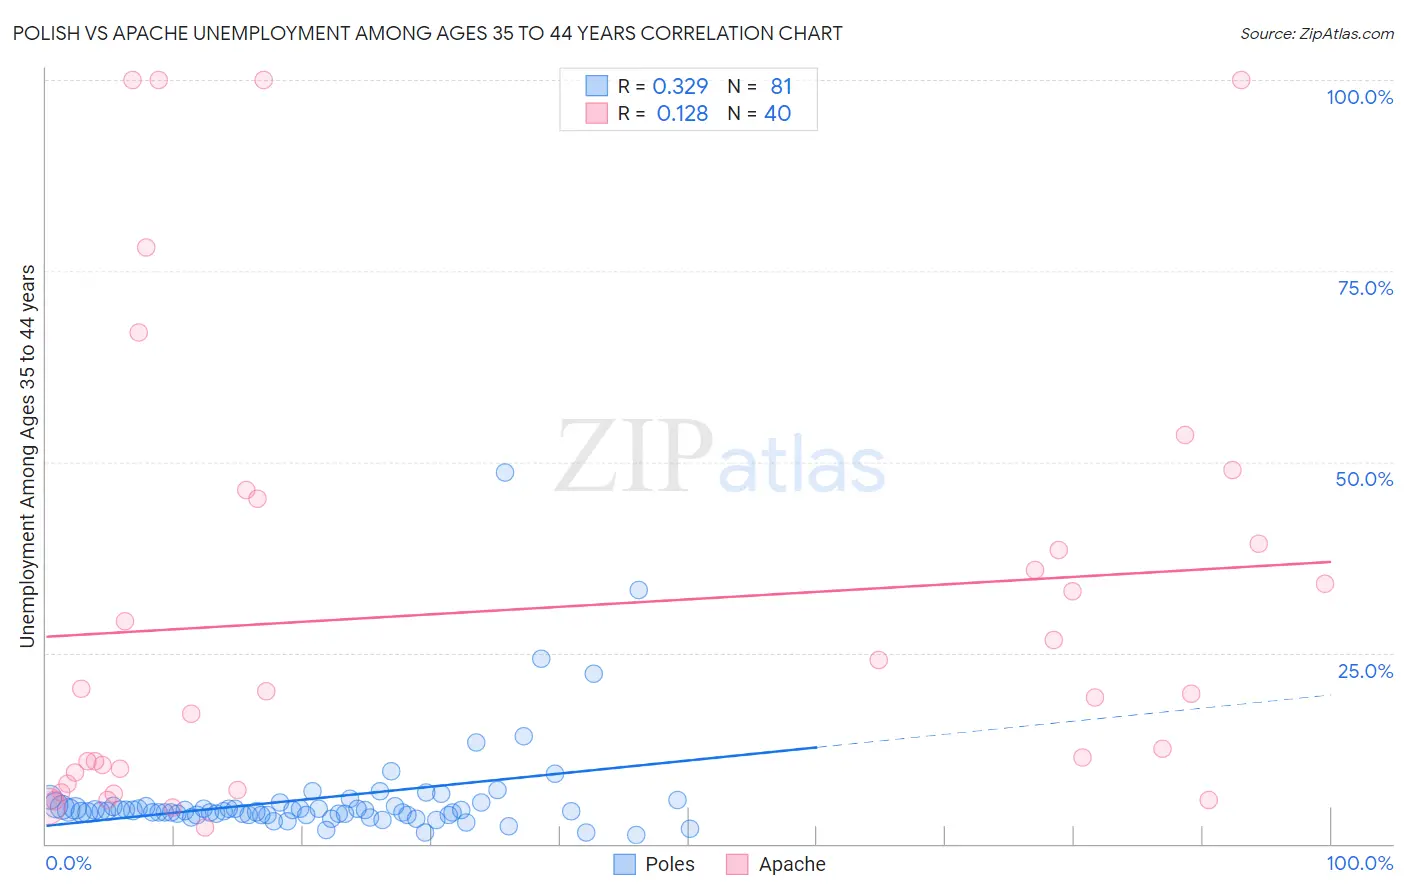 Polish vs Apache Unemployment Among Ages 35 to 44 years